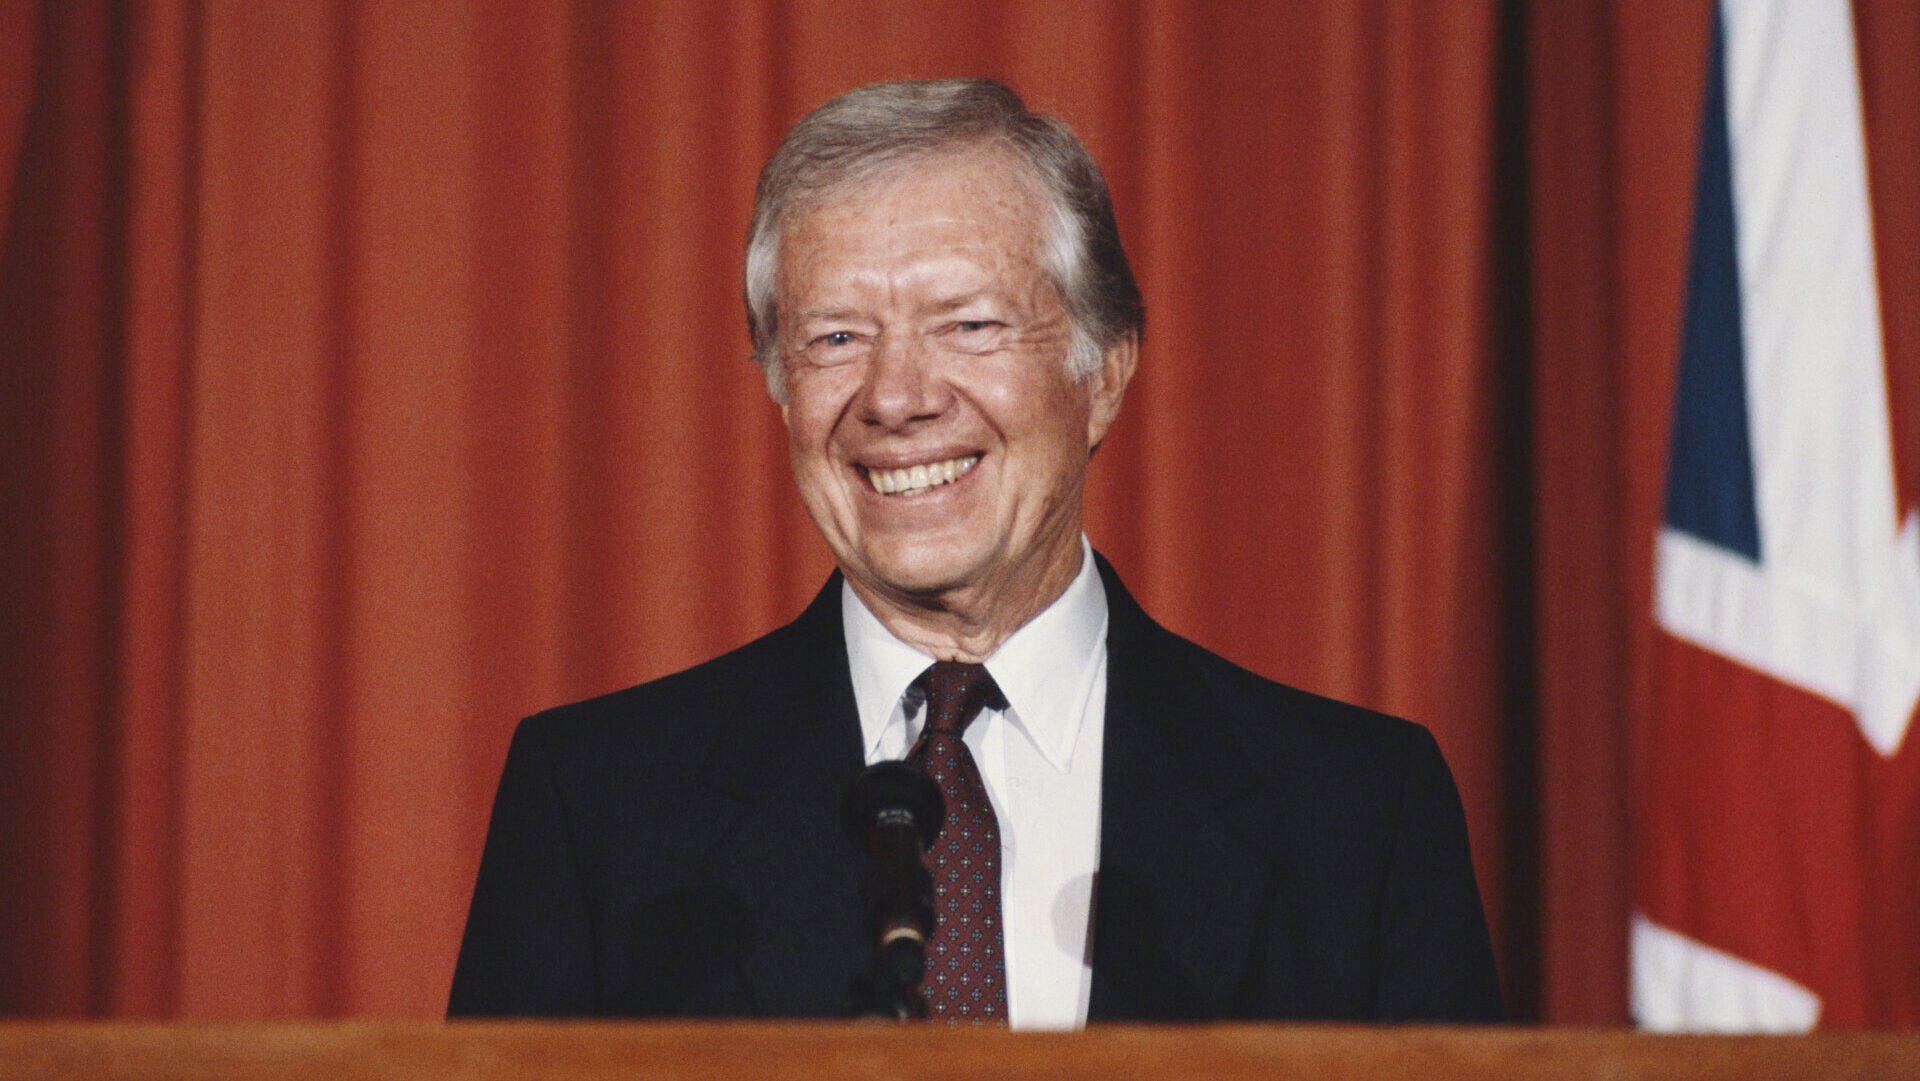 Republican Senator Duped by Jimmy Carter Death Hoax That’s Filled With Jokes